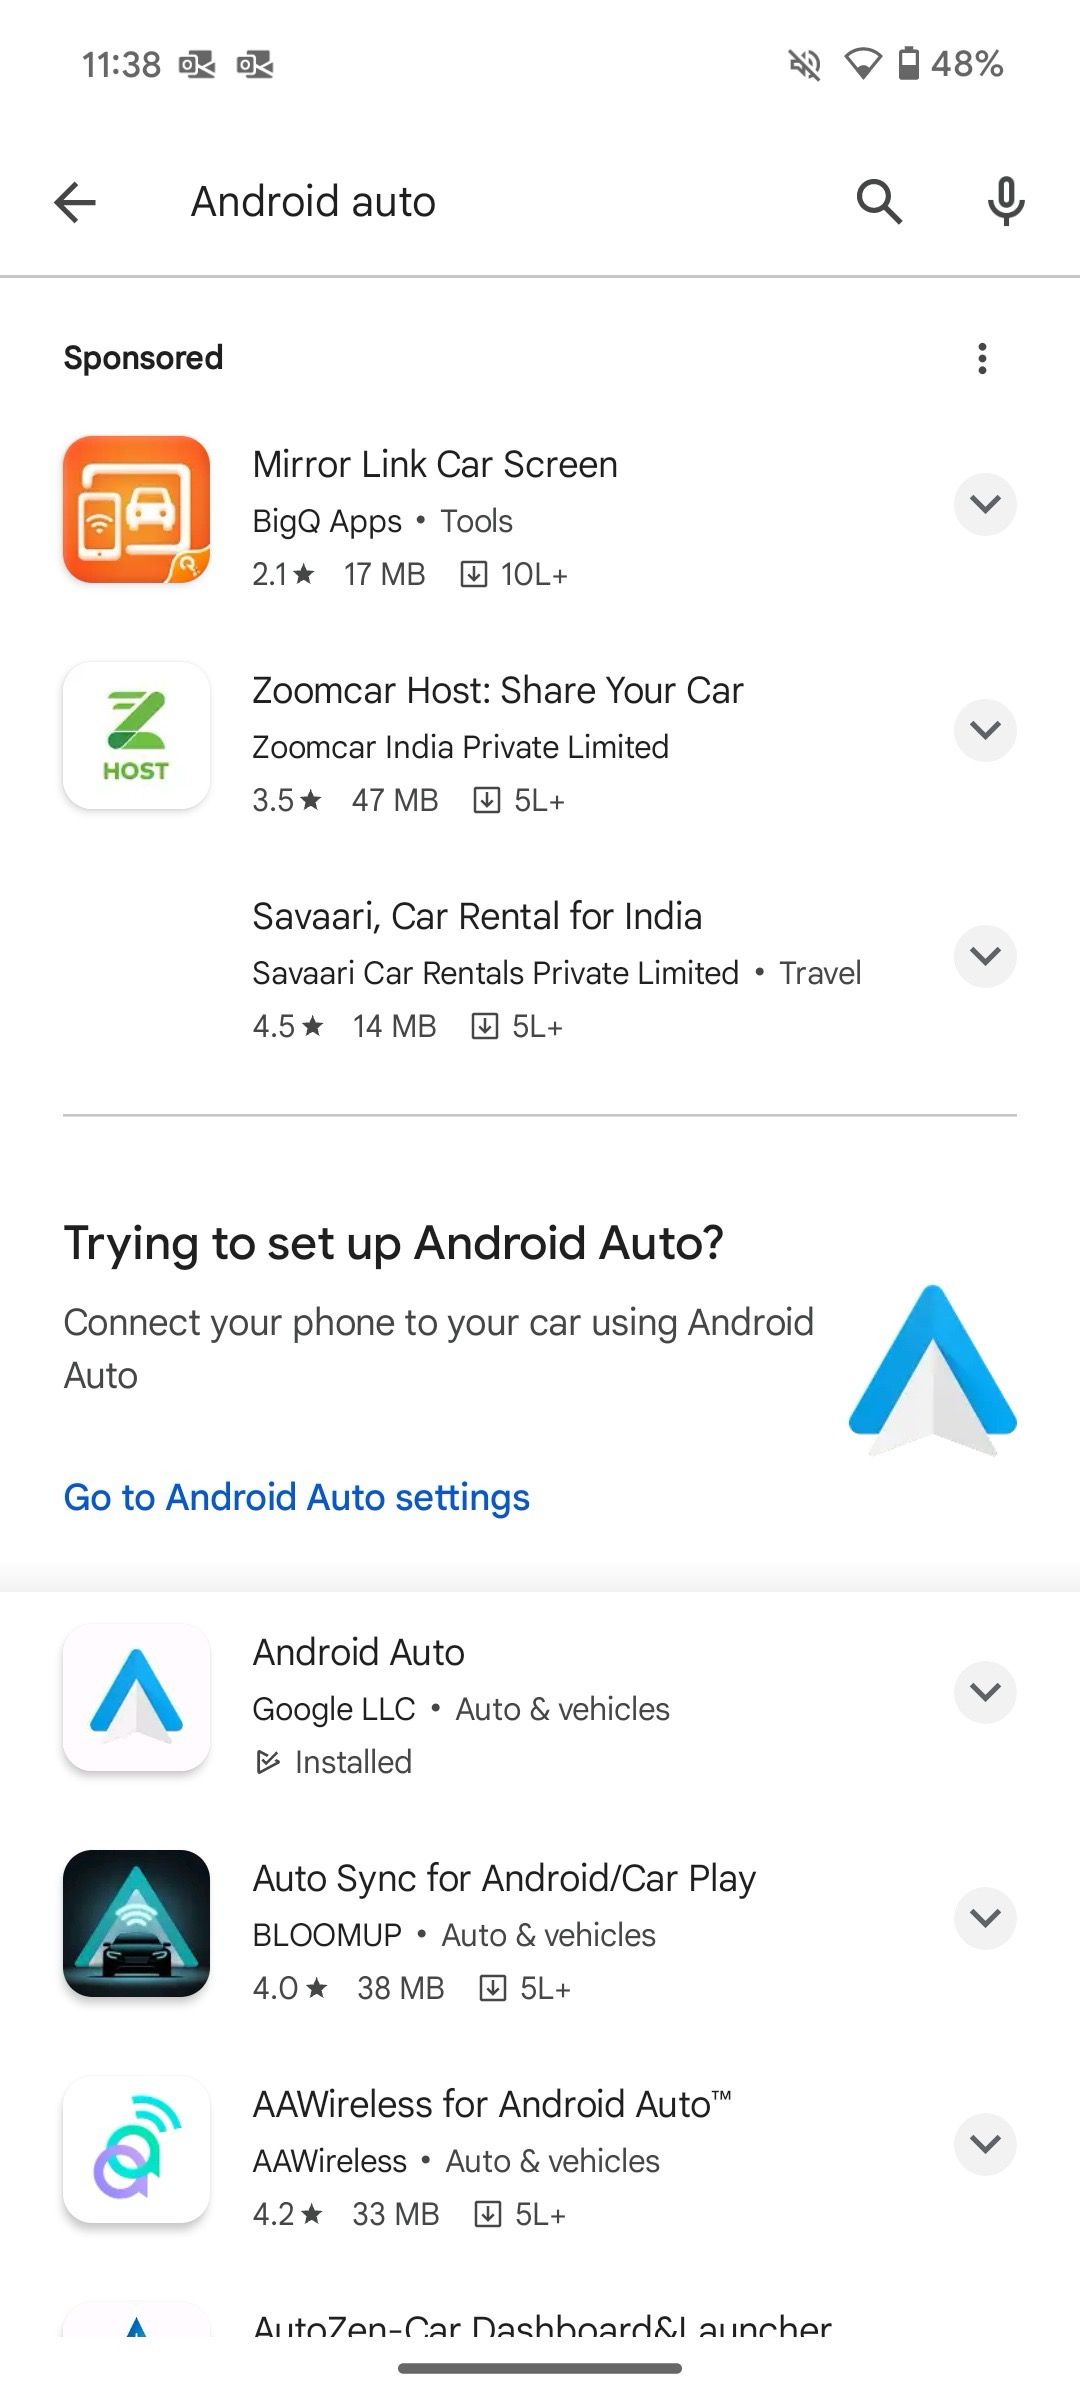 Search for Android Auto